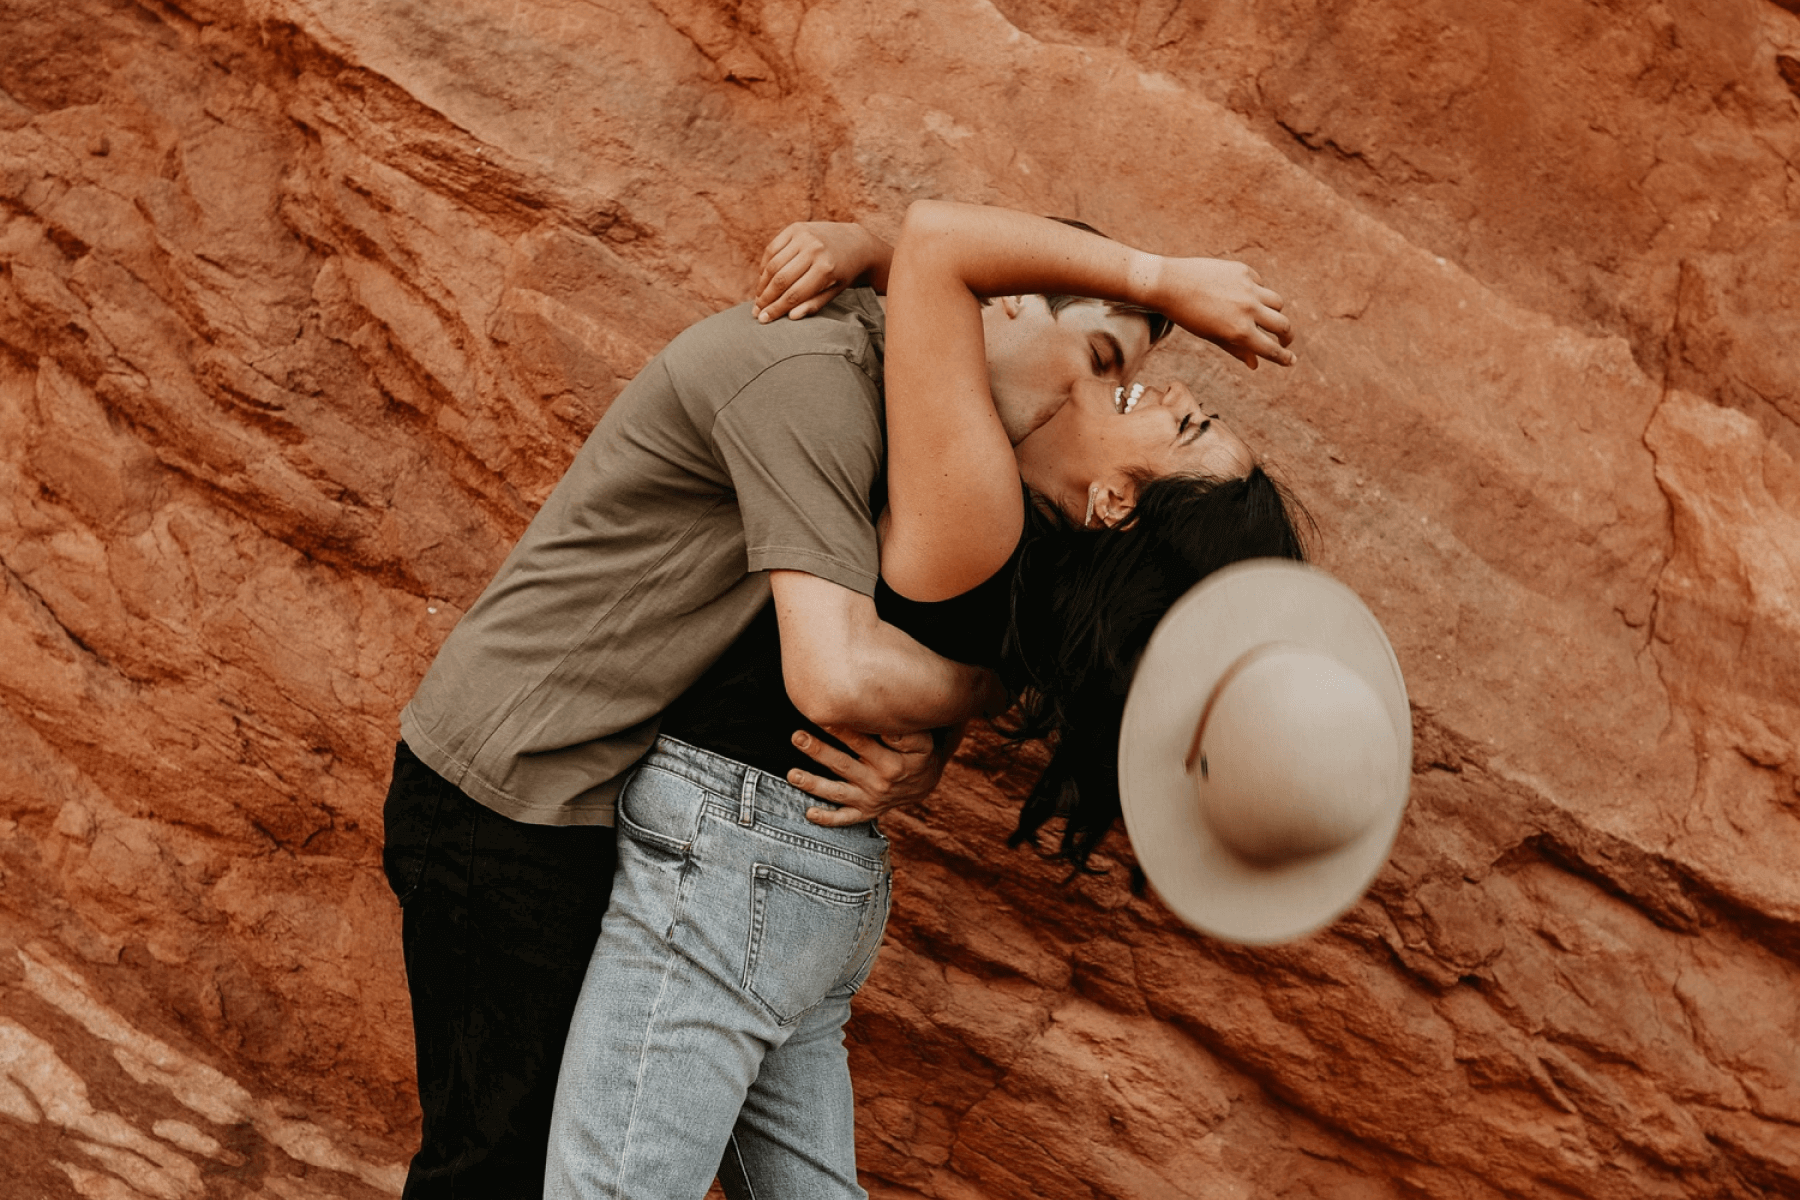 A man kisses a woman whose hat is falling off as they bend playfully in front of a red rock